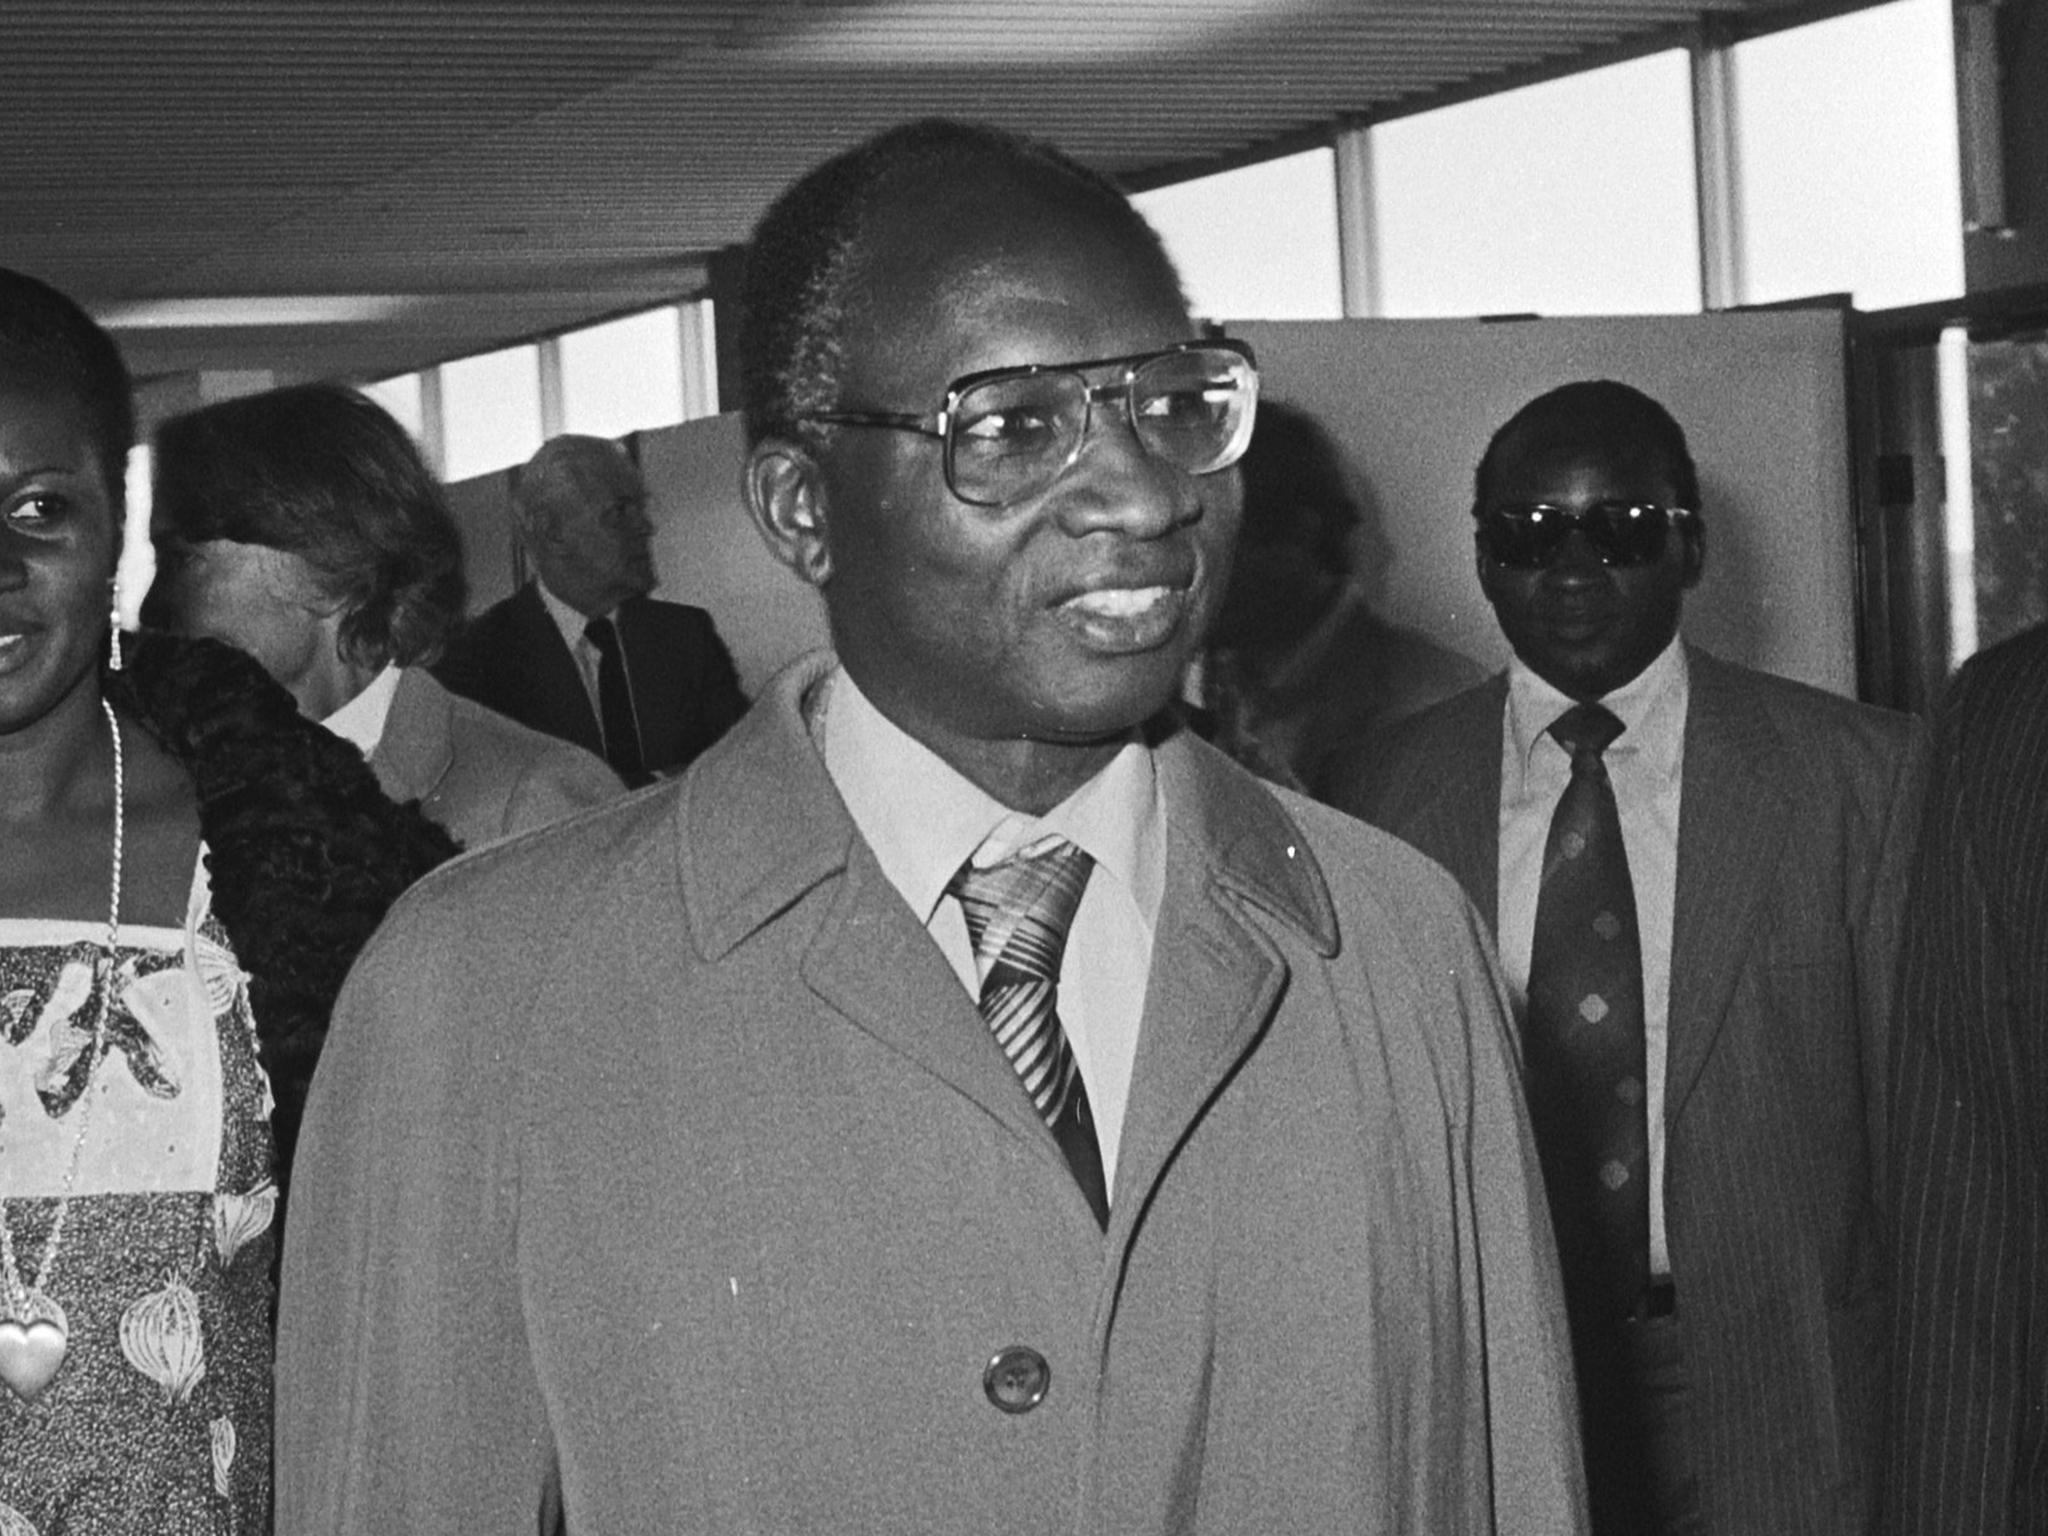 Jawara was re-elected president five times